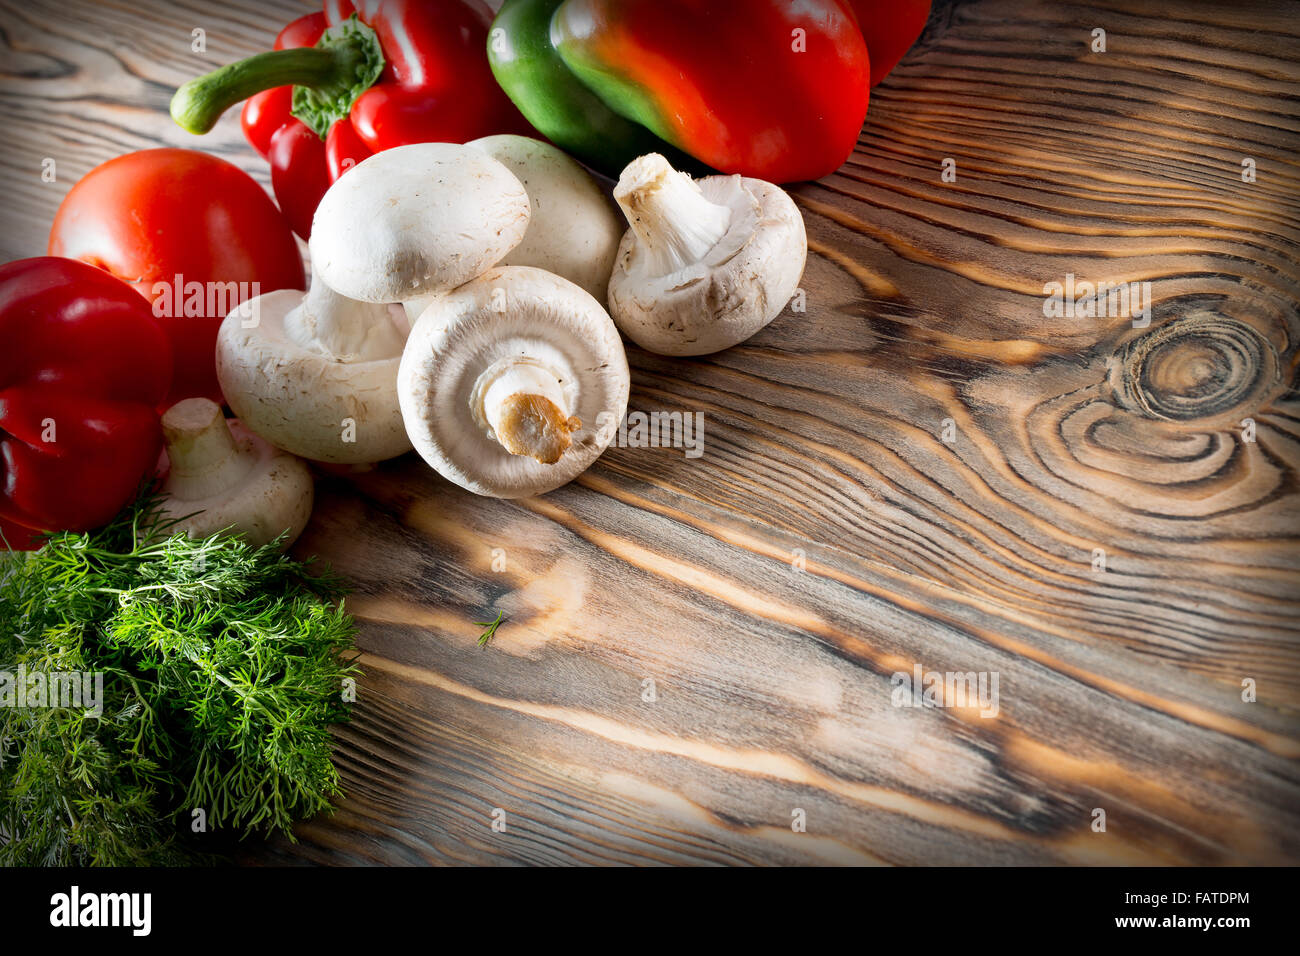 vegetable on the wooden background. Stock Photo